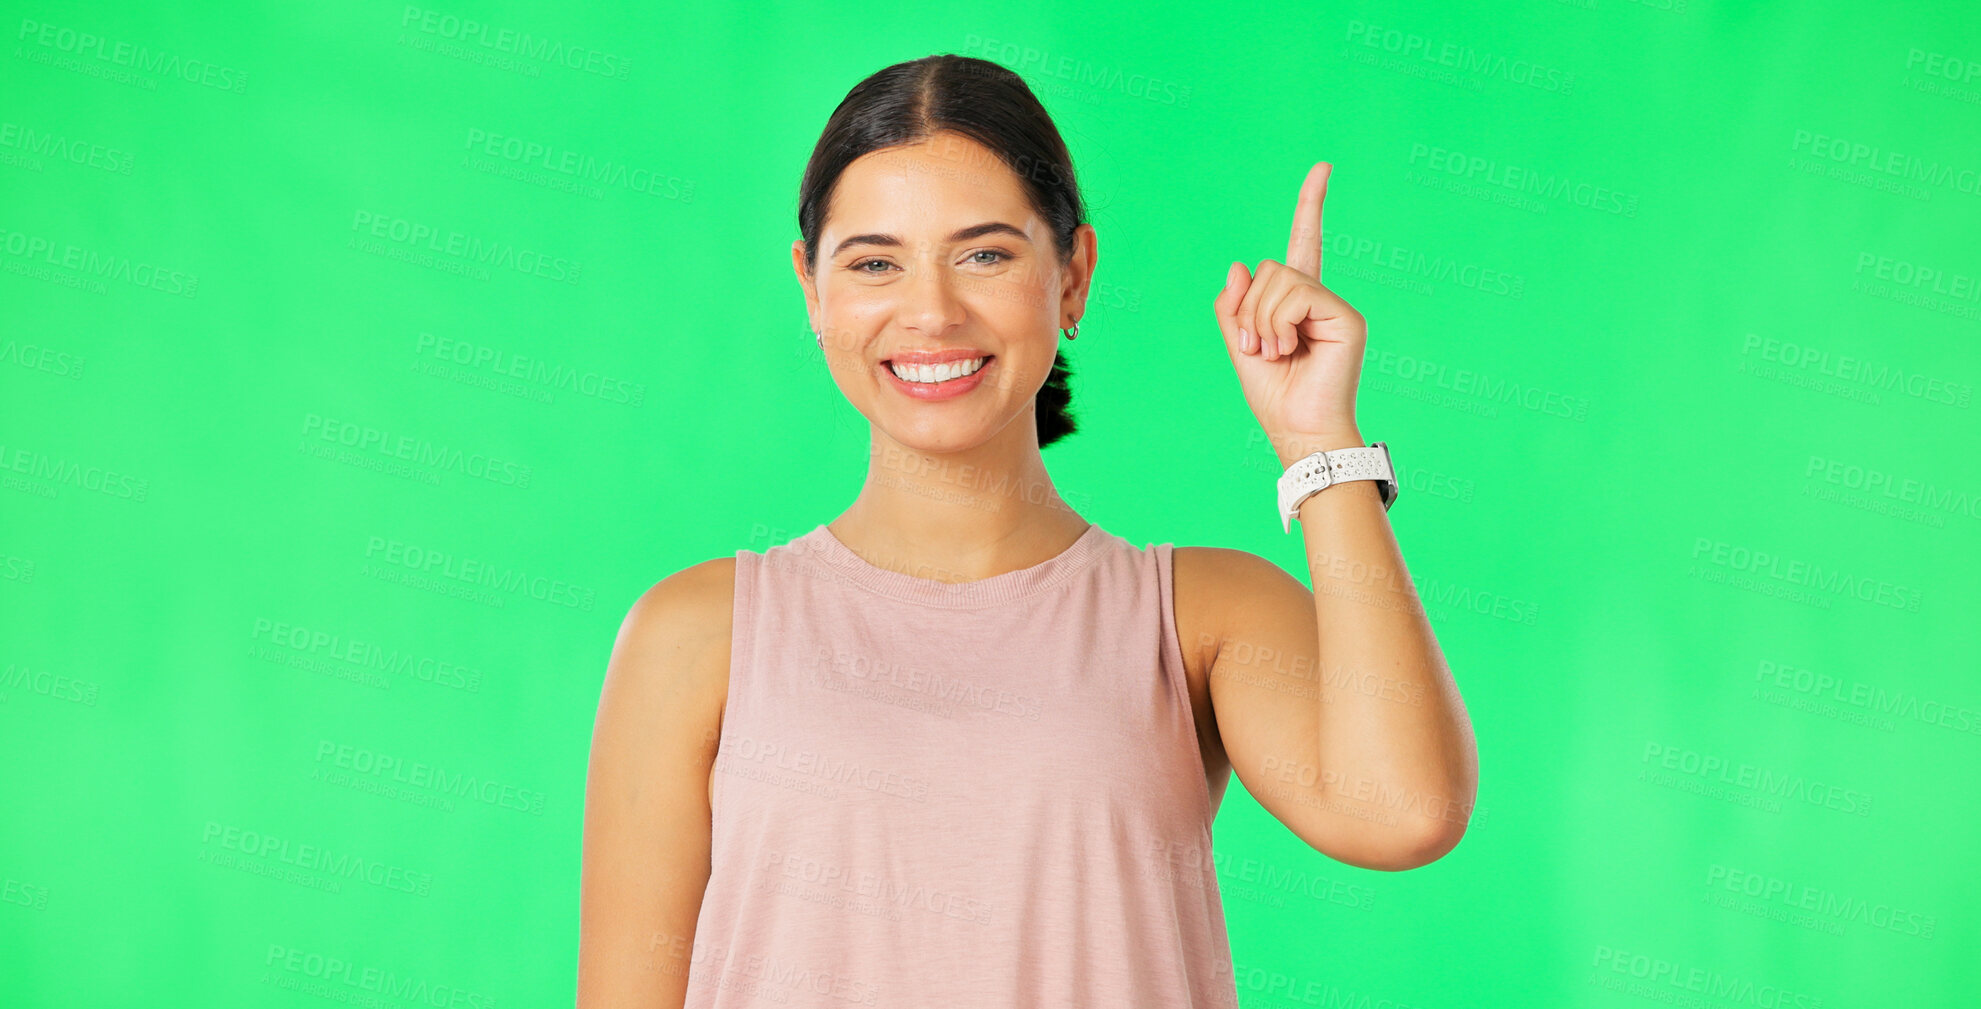 Buy stock photo Green screen portrait, happiness and woman pointing at studio sales offer, brand logo design or service commercial news. Presentation, coming soon notification and model ads gesture on background